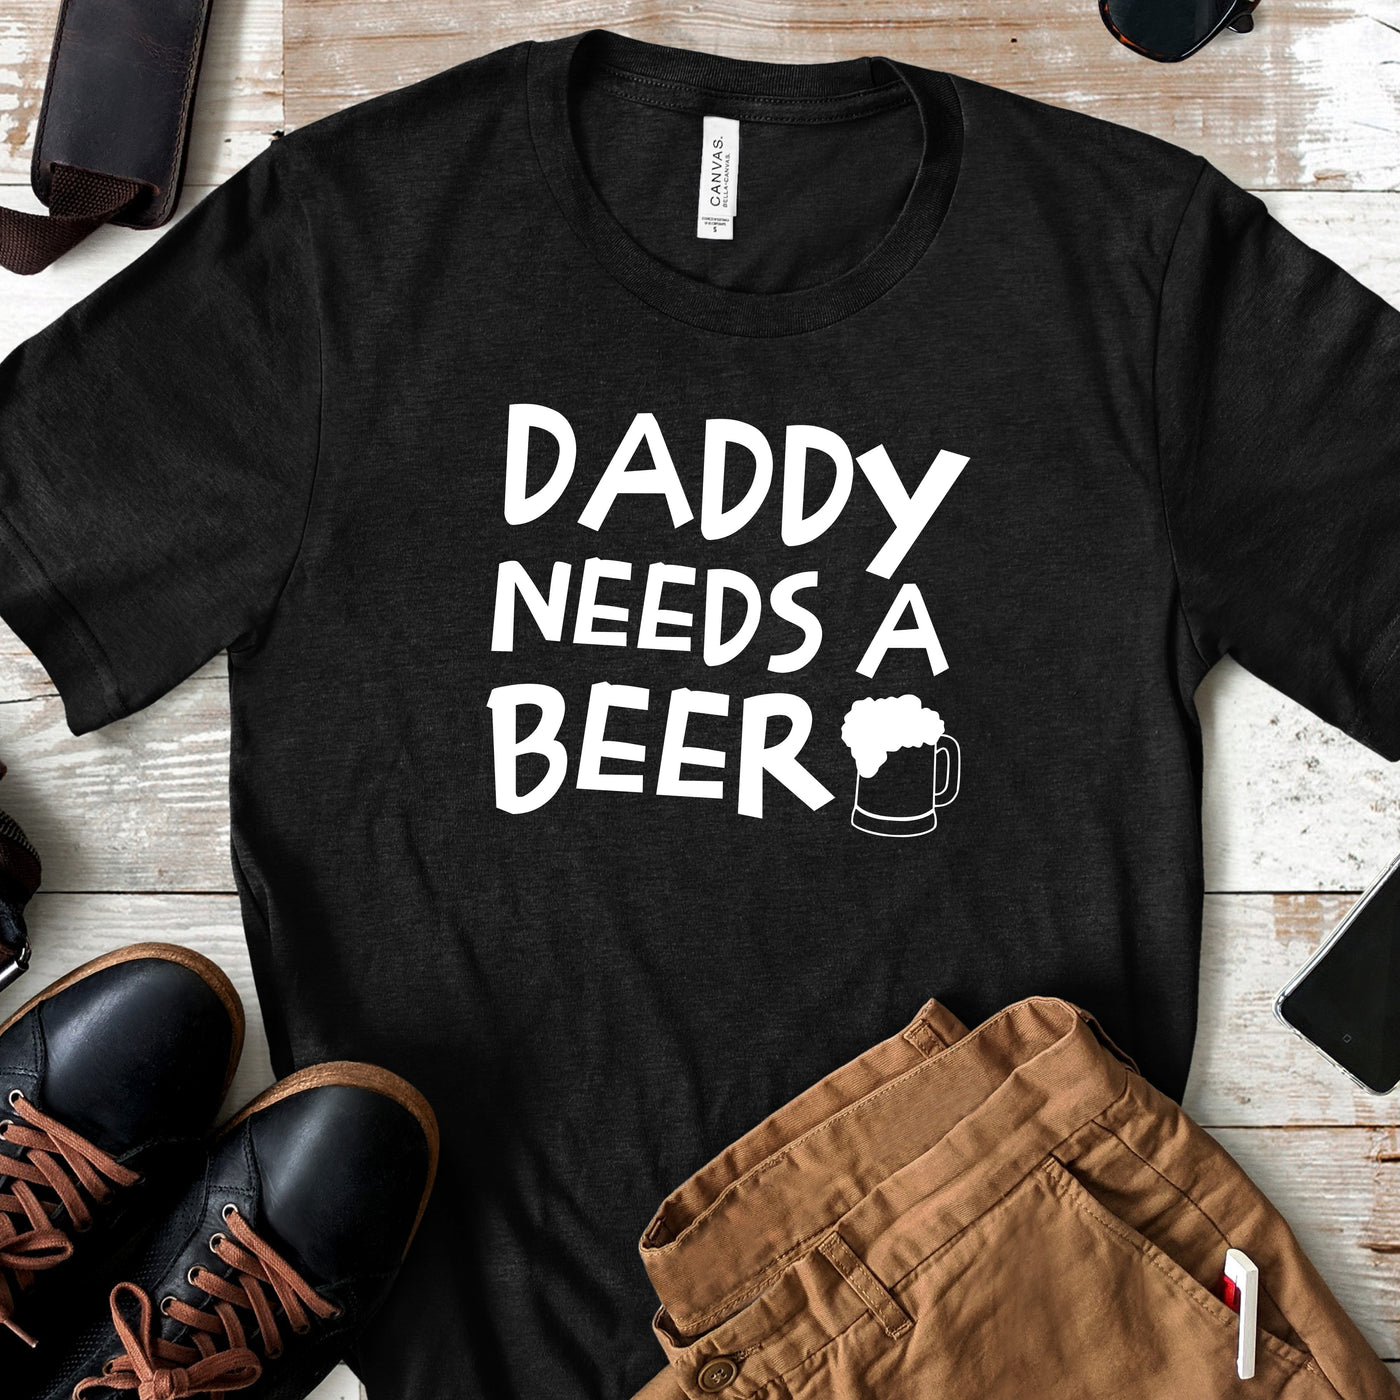 Daddy Needs a Beer | Funny Drinking Shirts